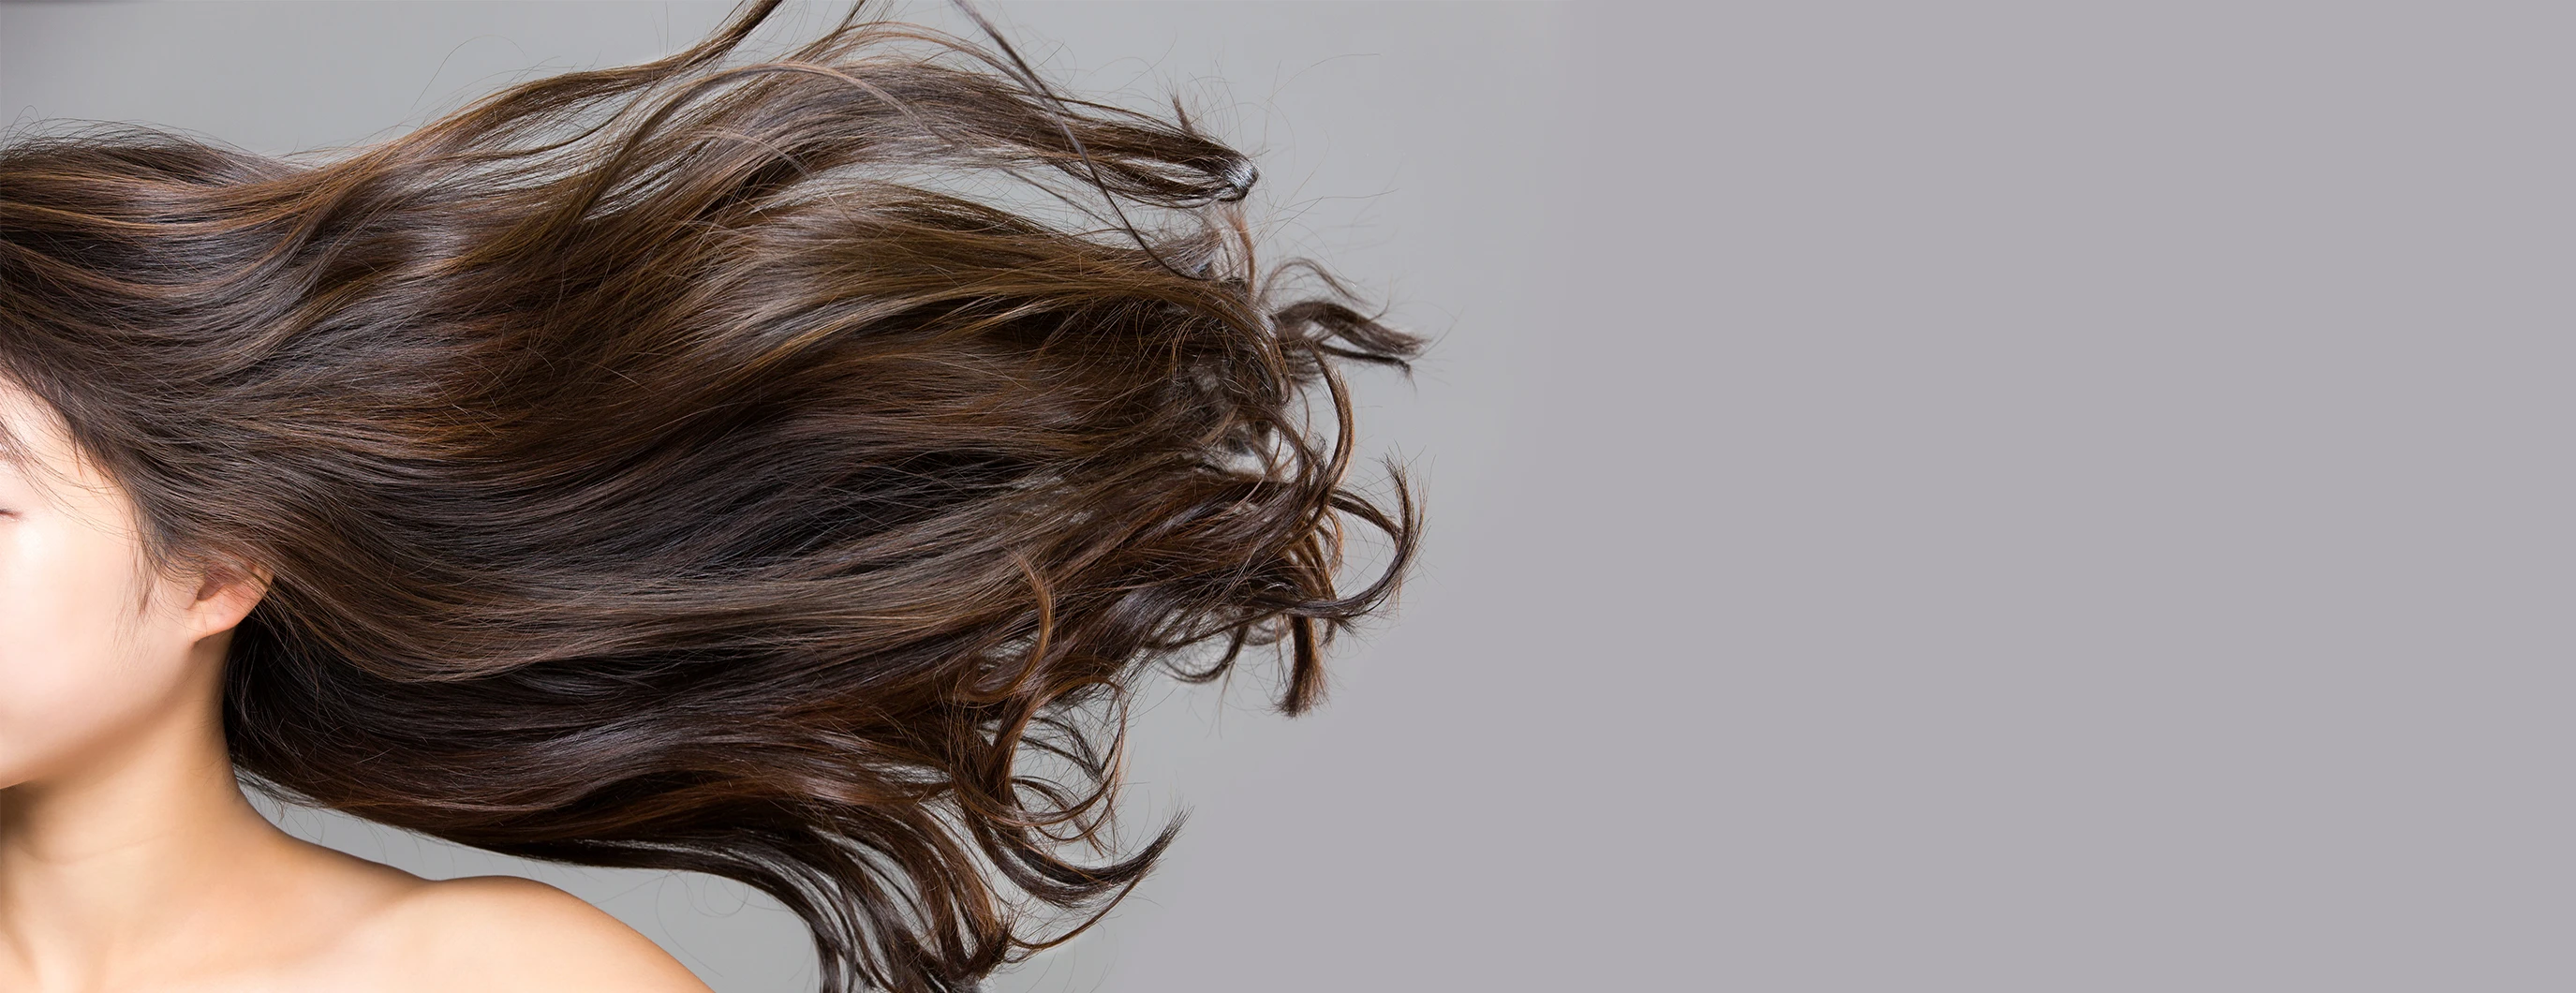 5 Natural Ingredients That Helps Moisturize Hair | Pantene IN